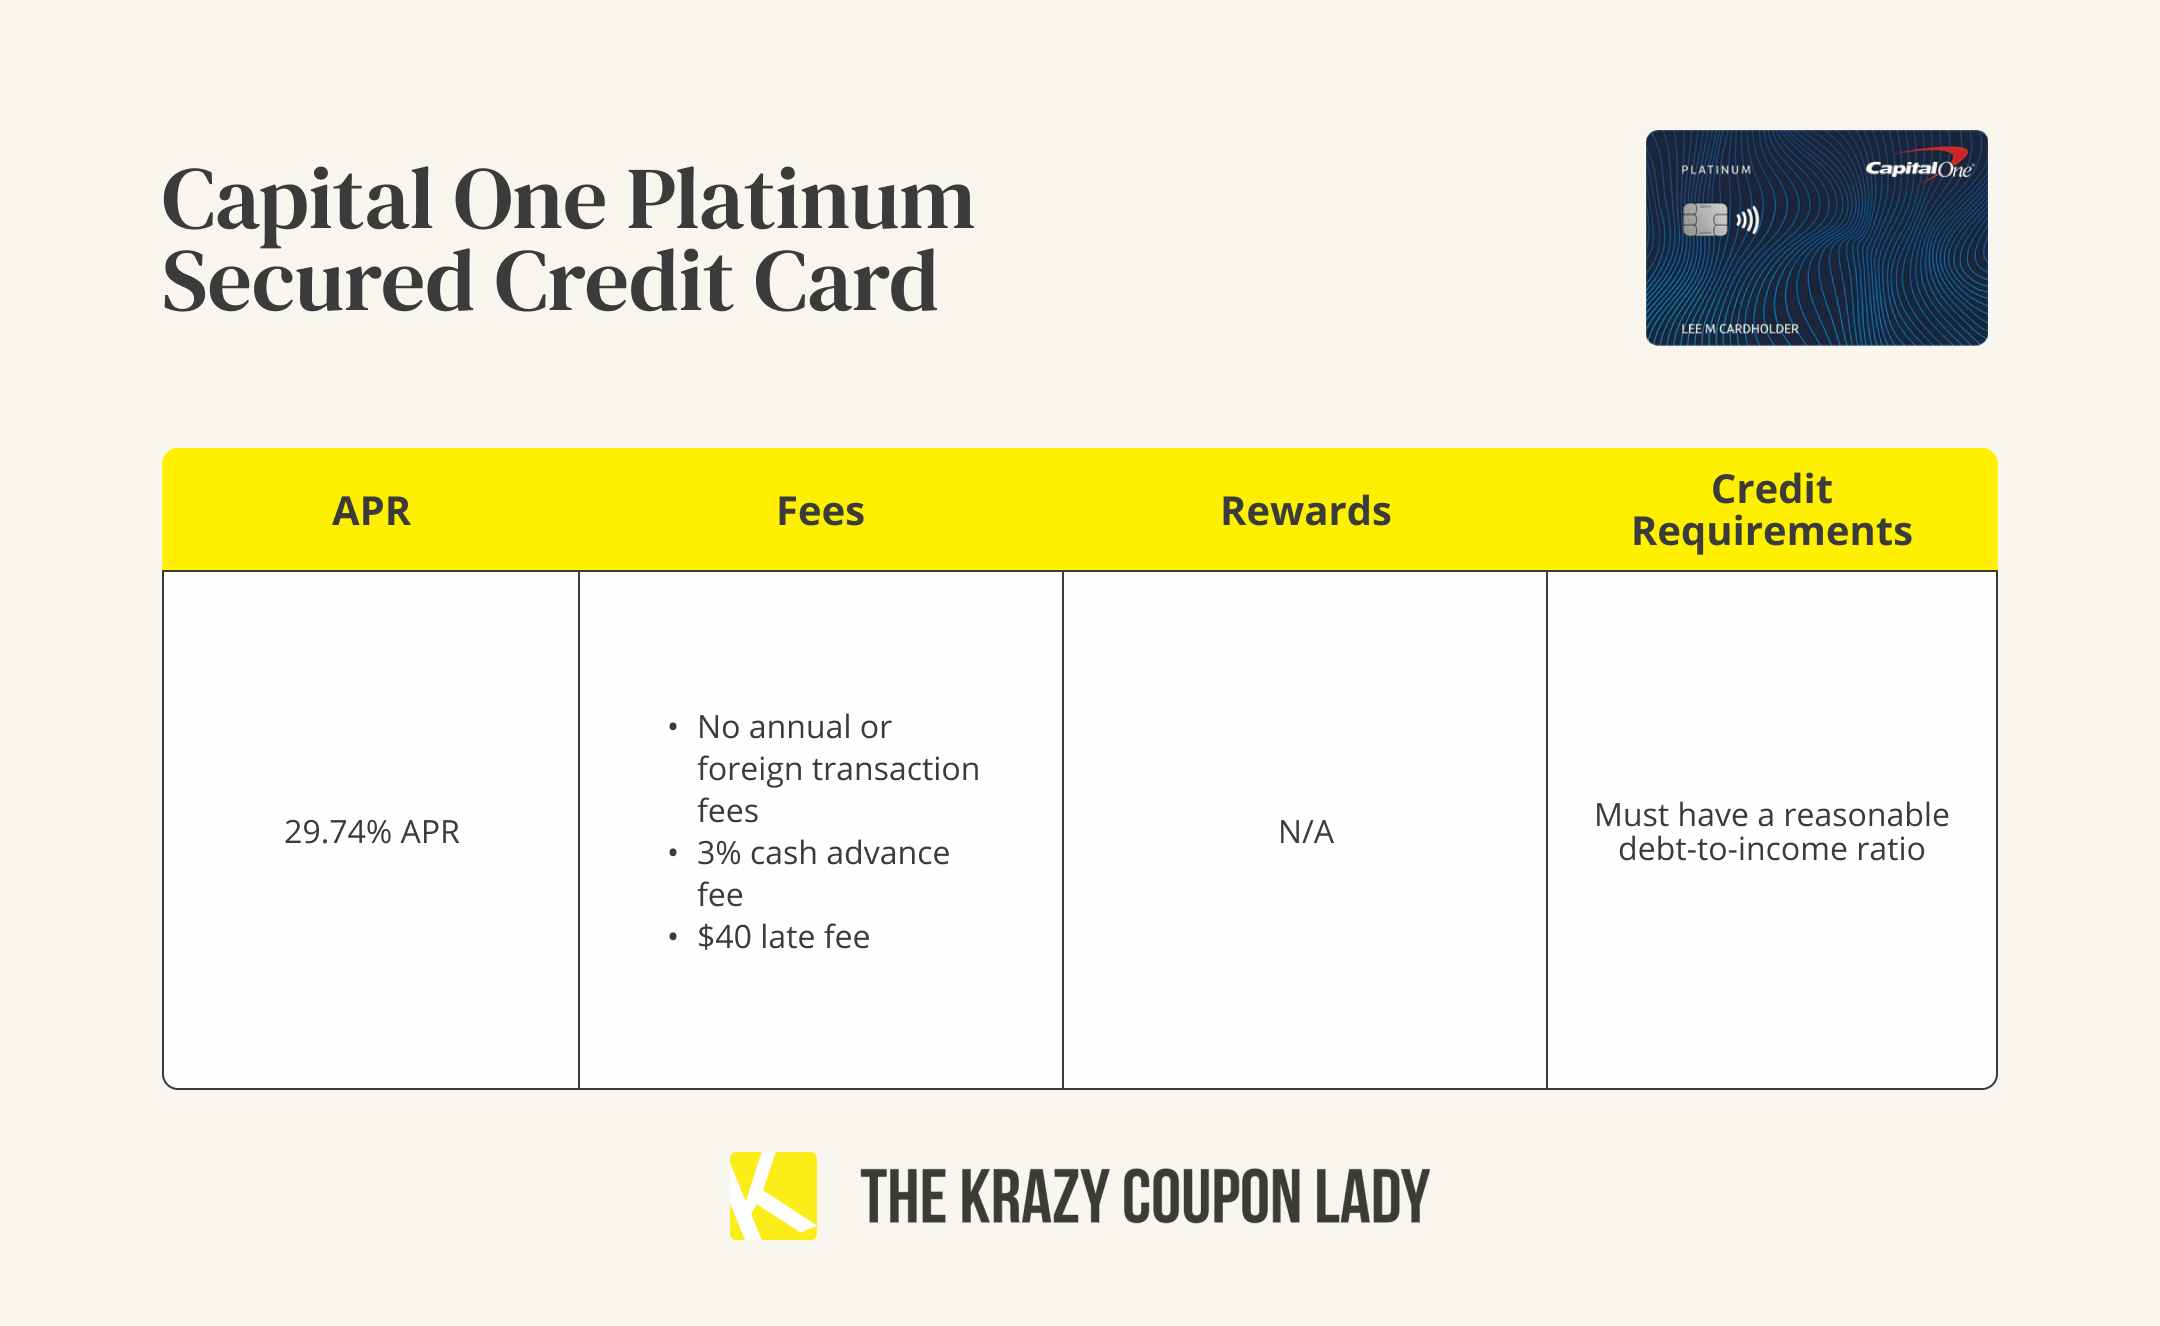 A graphic showing the APR, fees, rewards, and credit requirements for a Capital One Platinum secured credit card